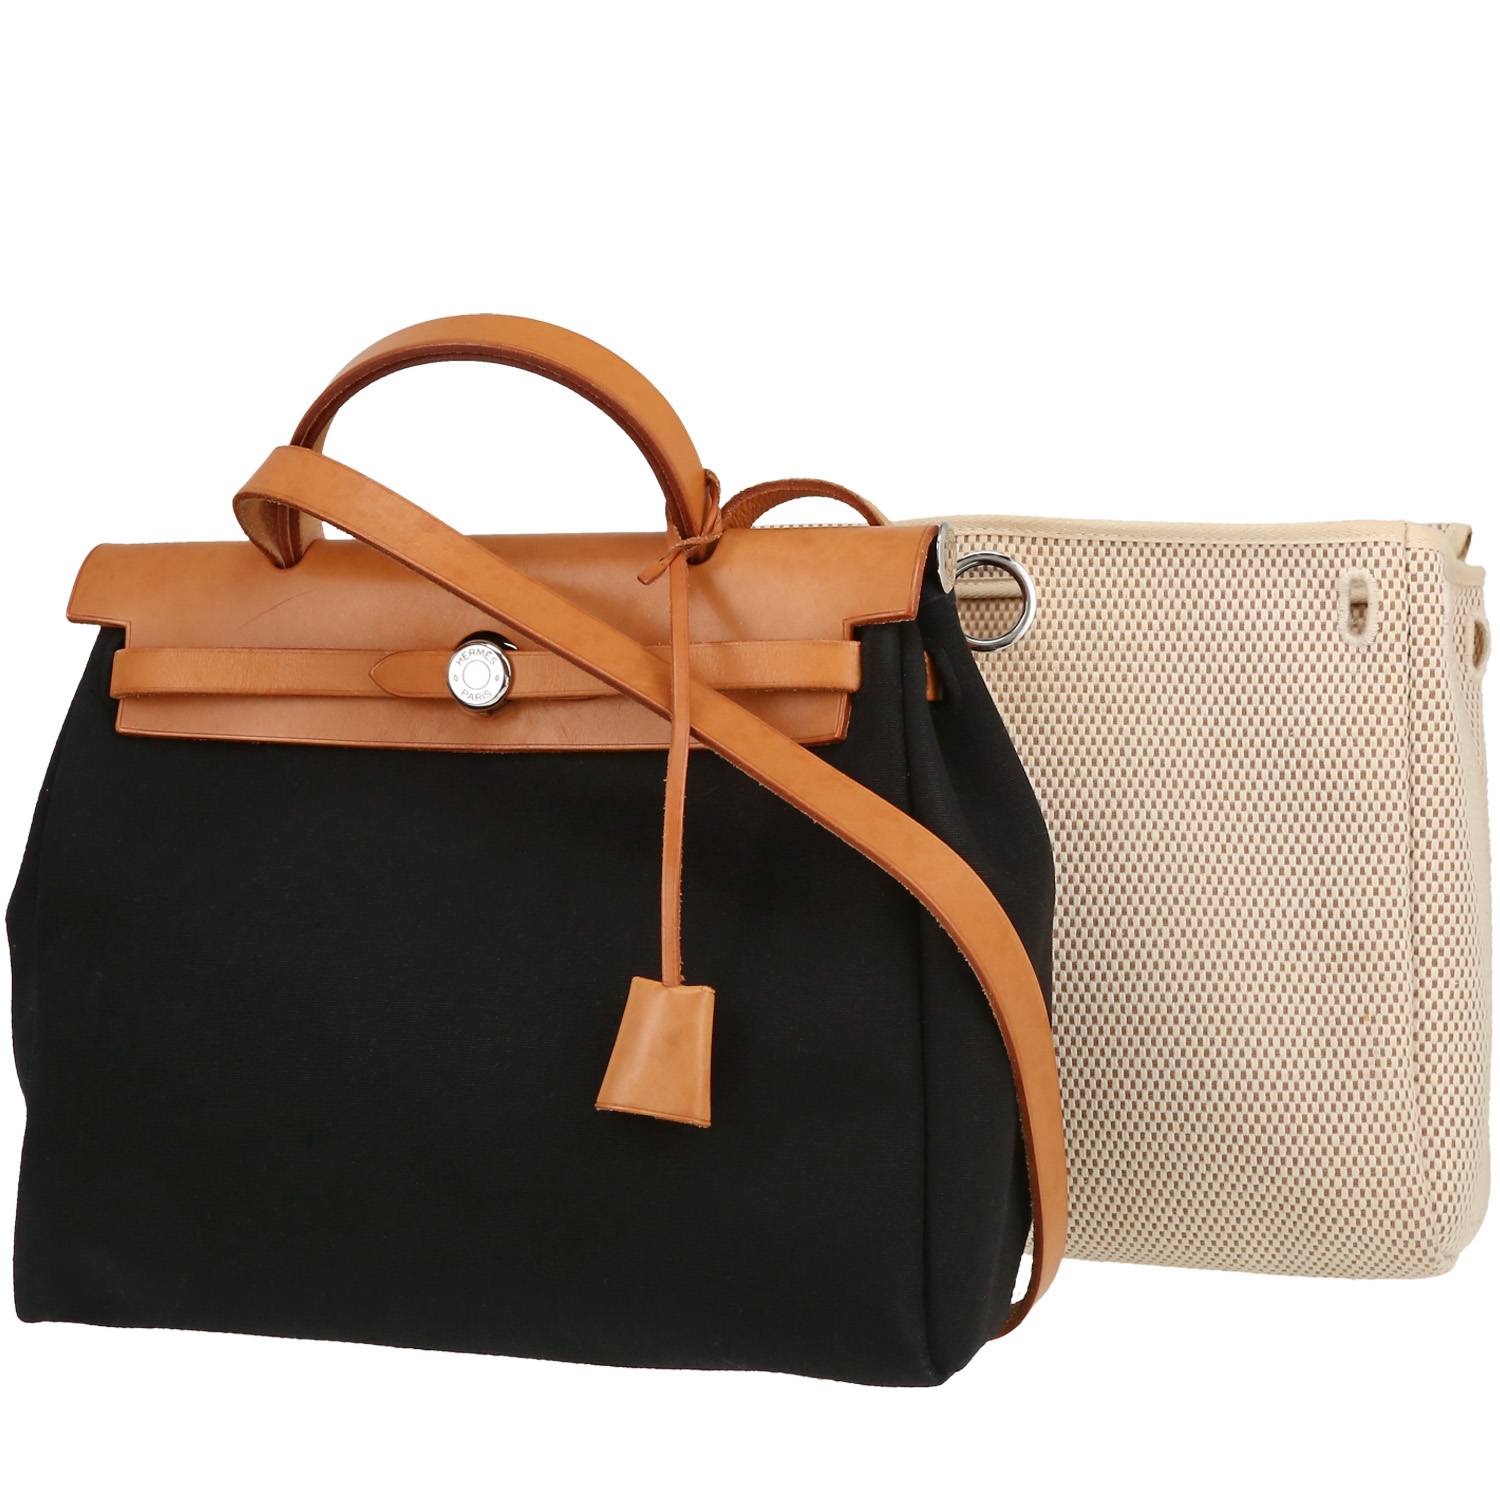 Herbag Handbag In Black Canvas And Natural Leather